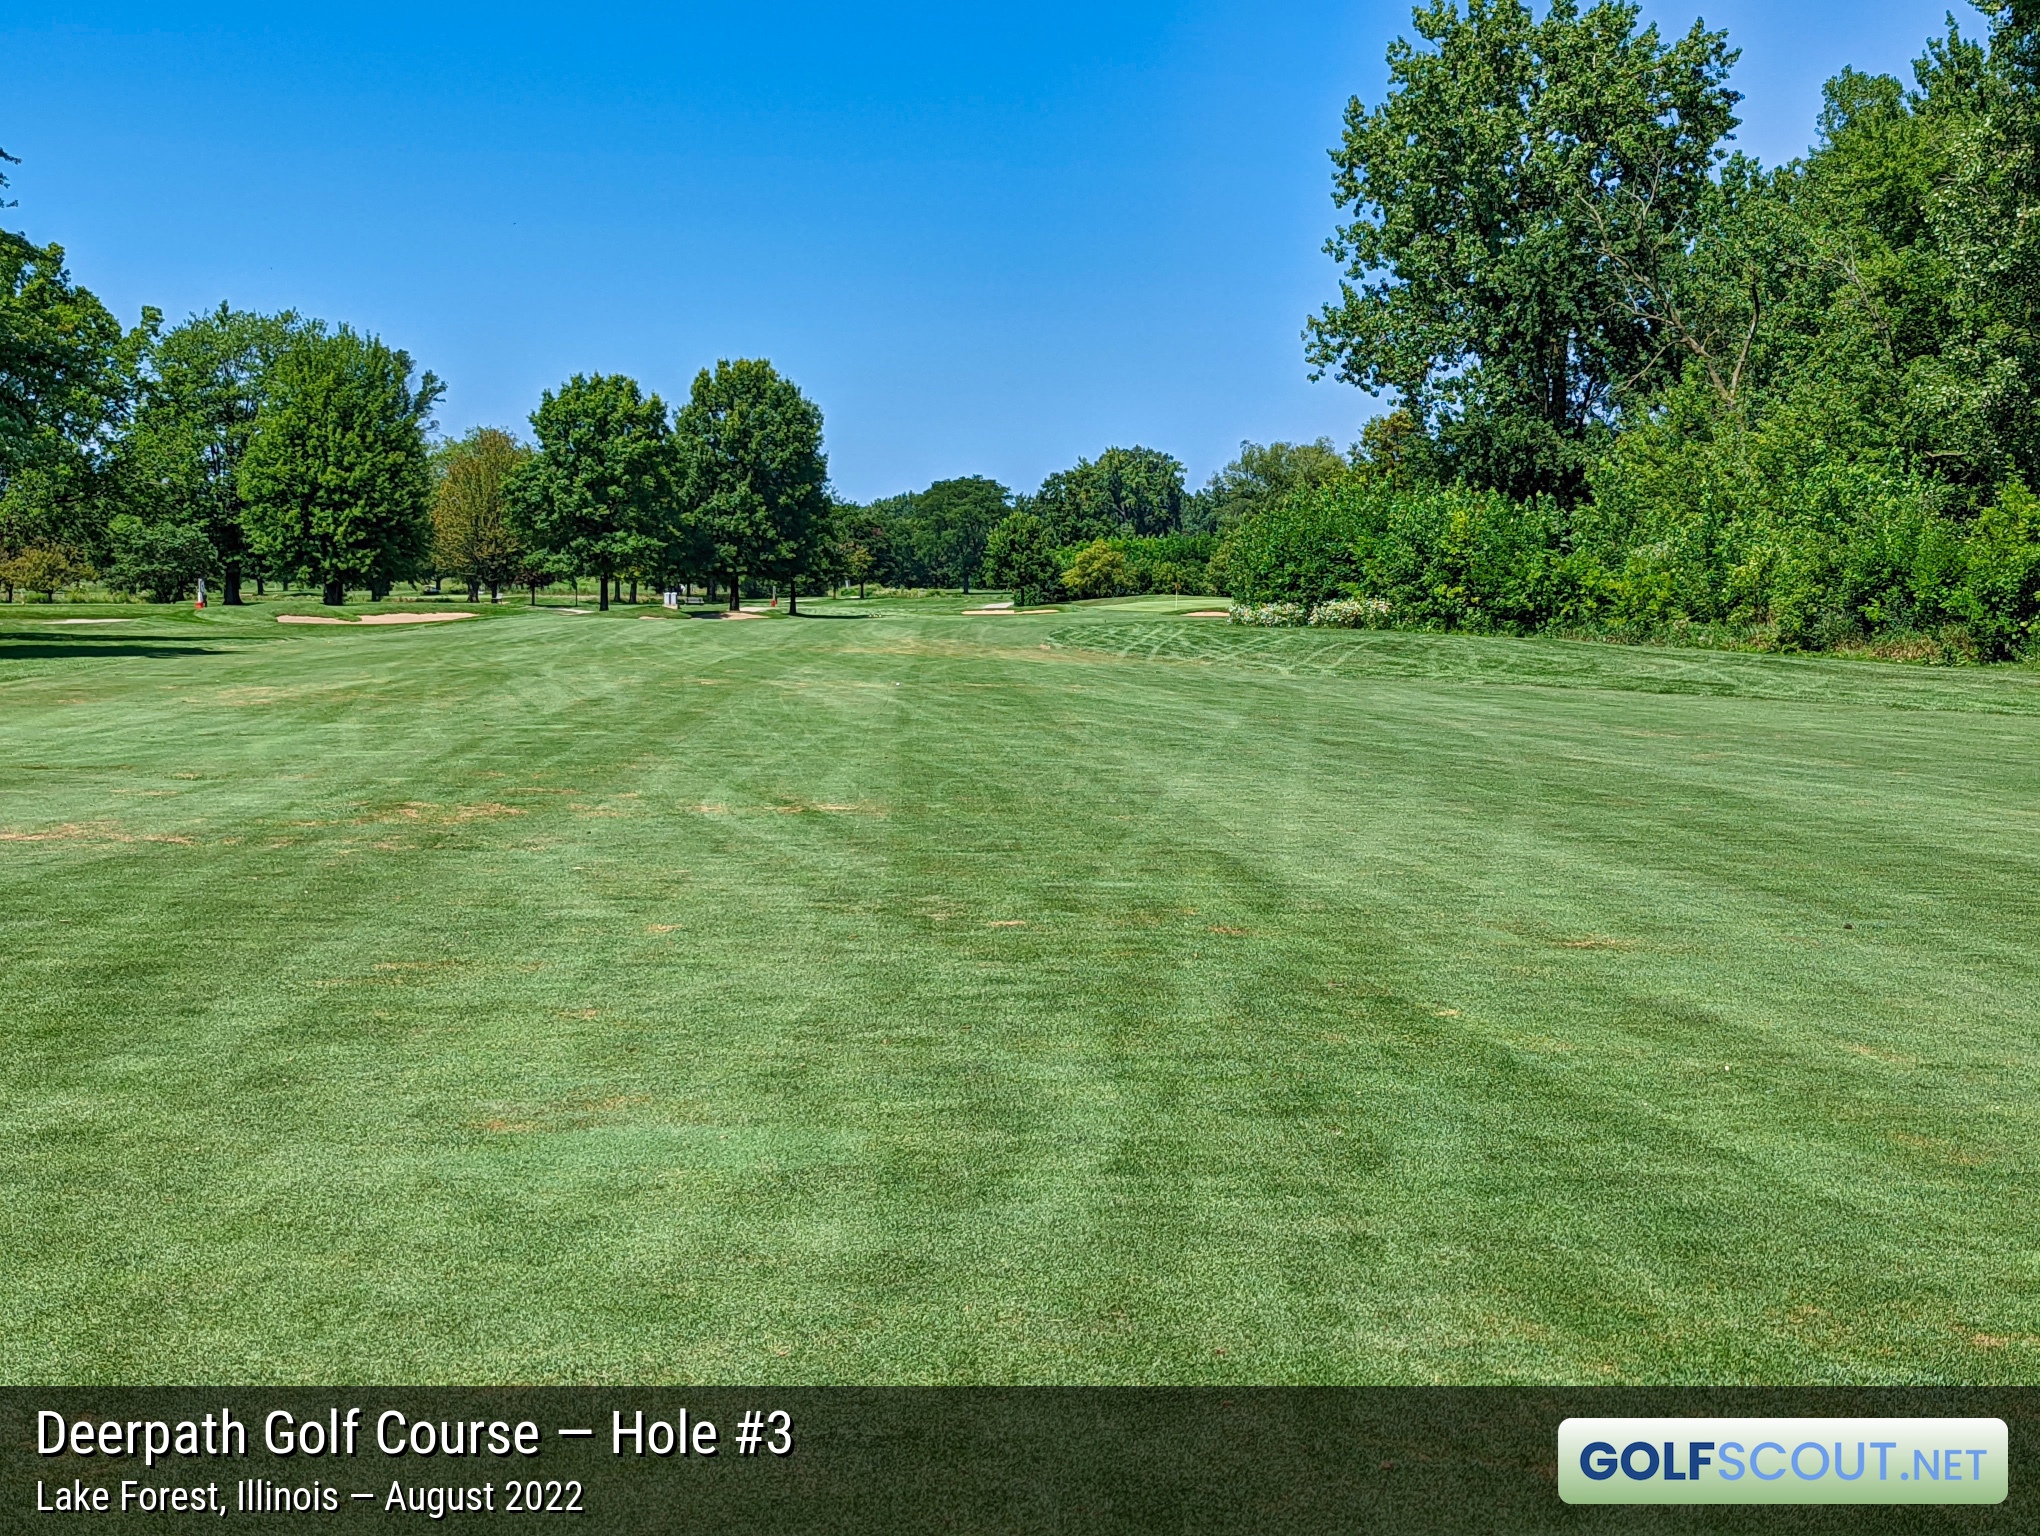 Photo of hole #3 at Deerpath Golf Course in Lake Forest, Illinois. 